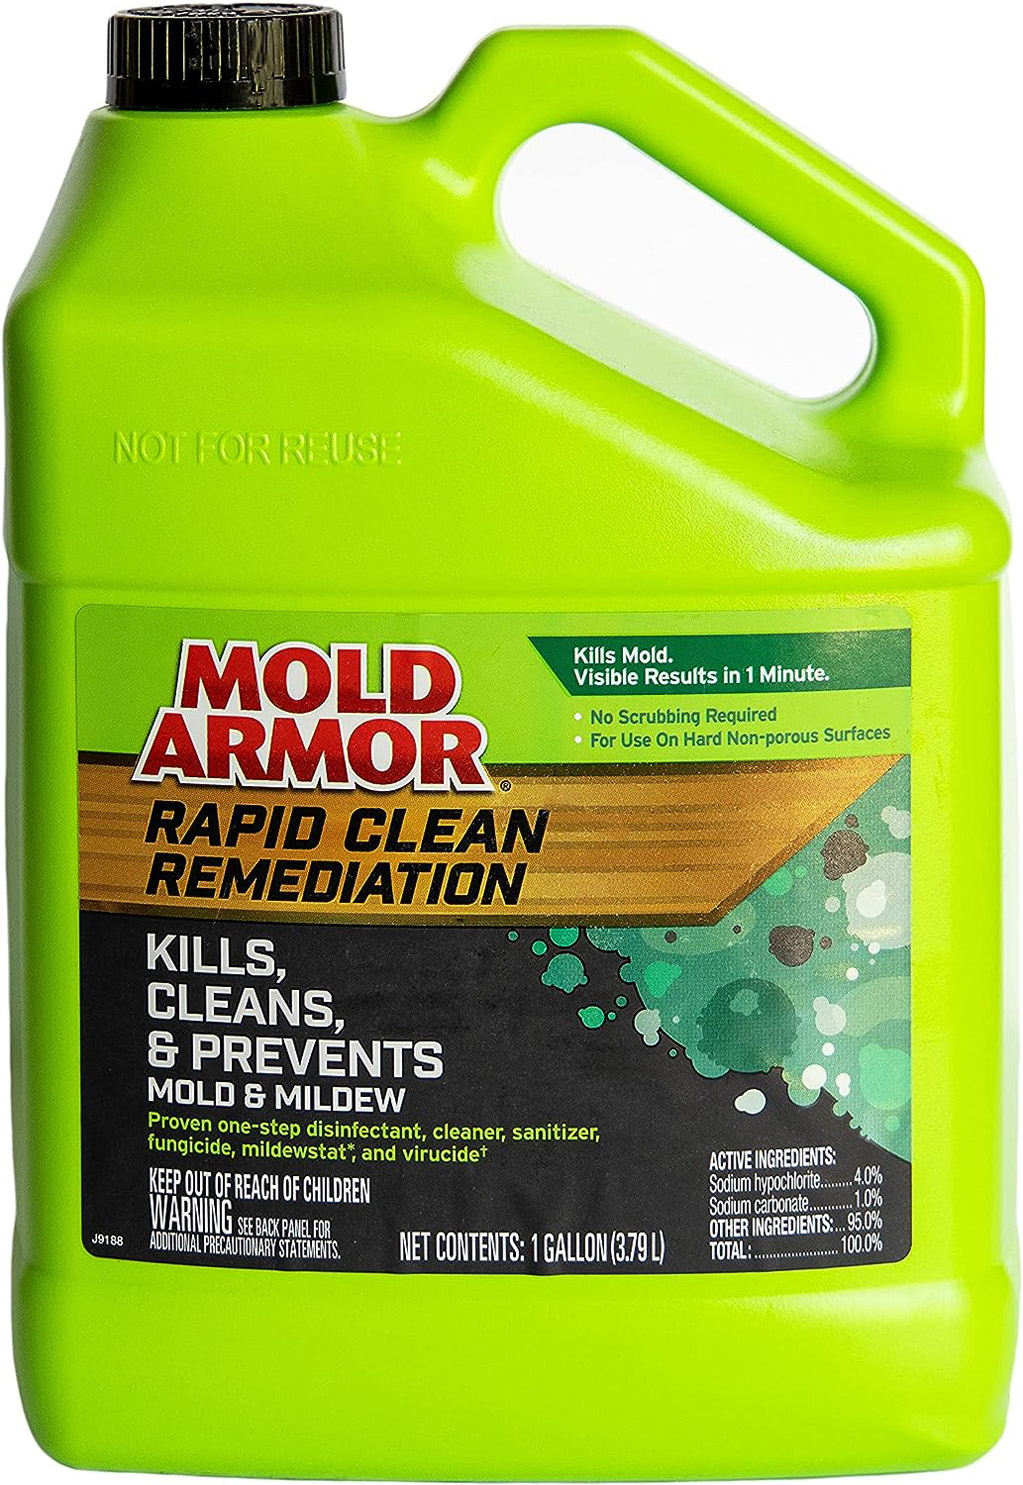 MOLD ARMOR Rapid Clean Remediation